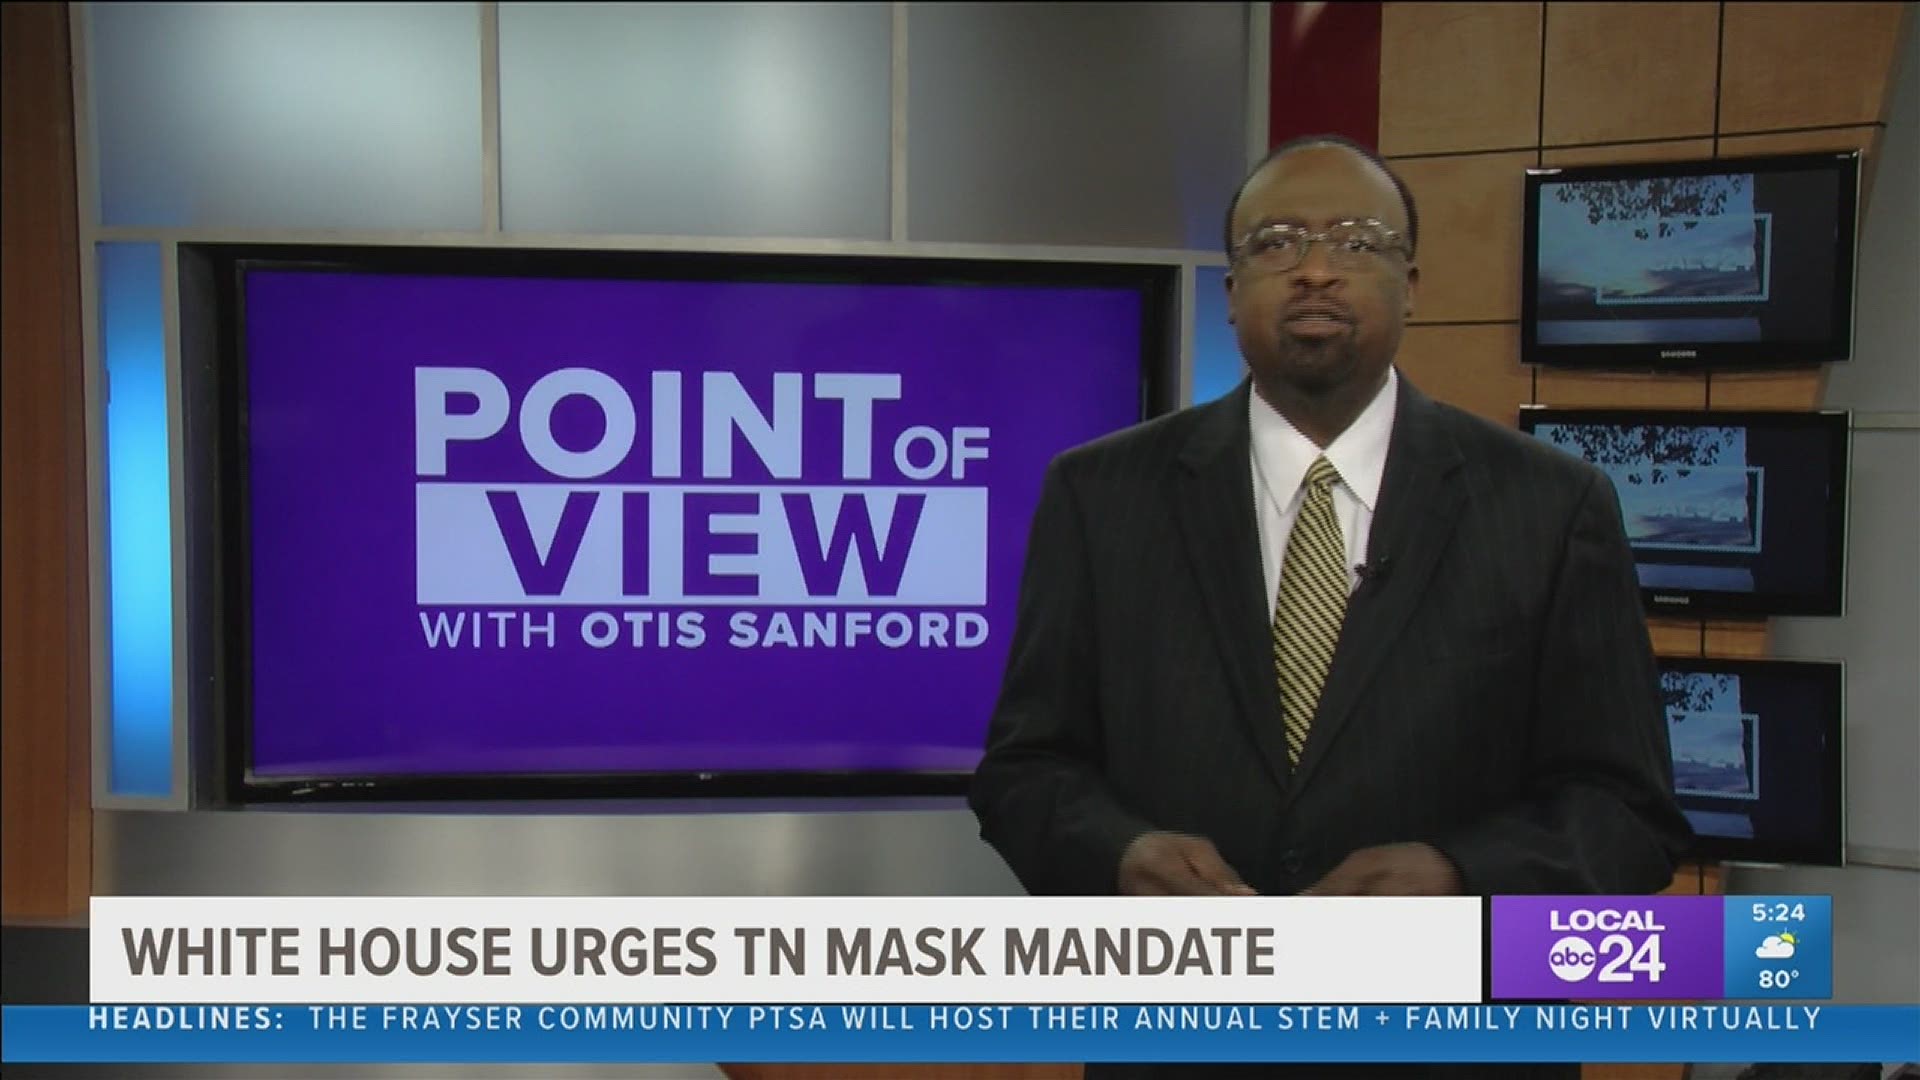 Local 24 News political analyst and commentator Otis Sanford shares his point of view on a statewide mask mandate.